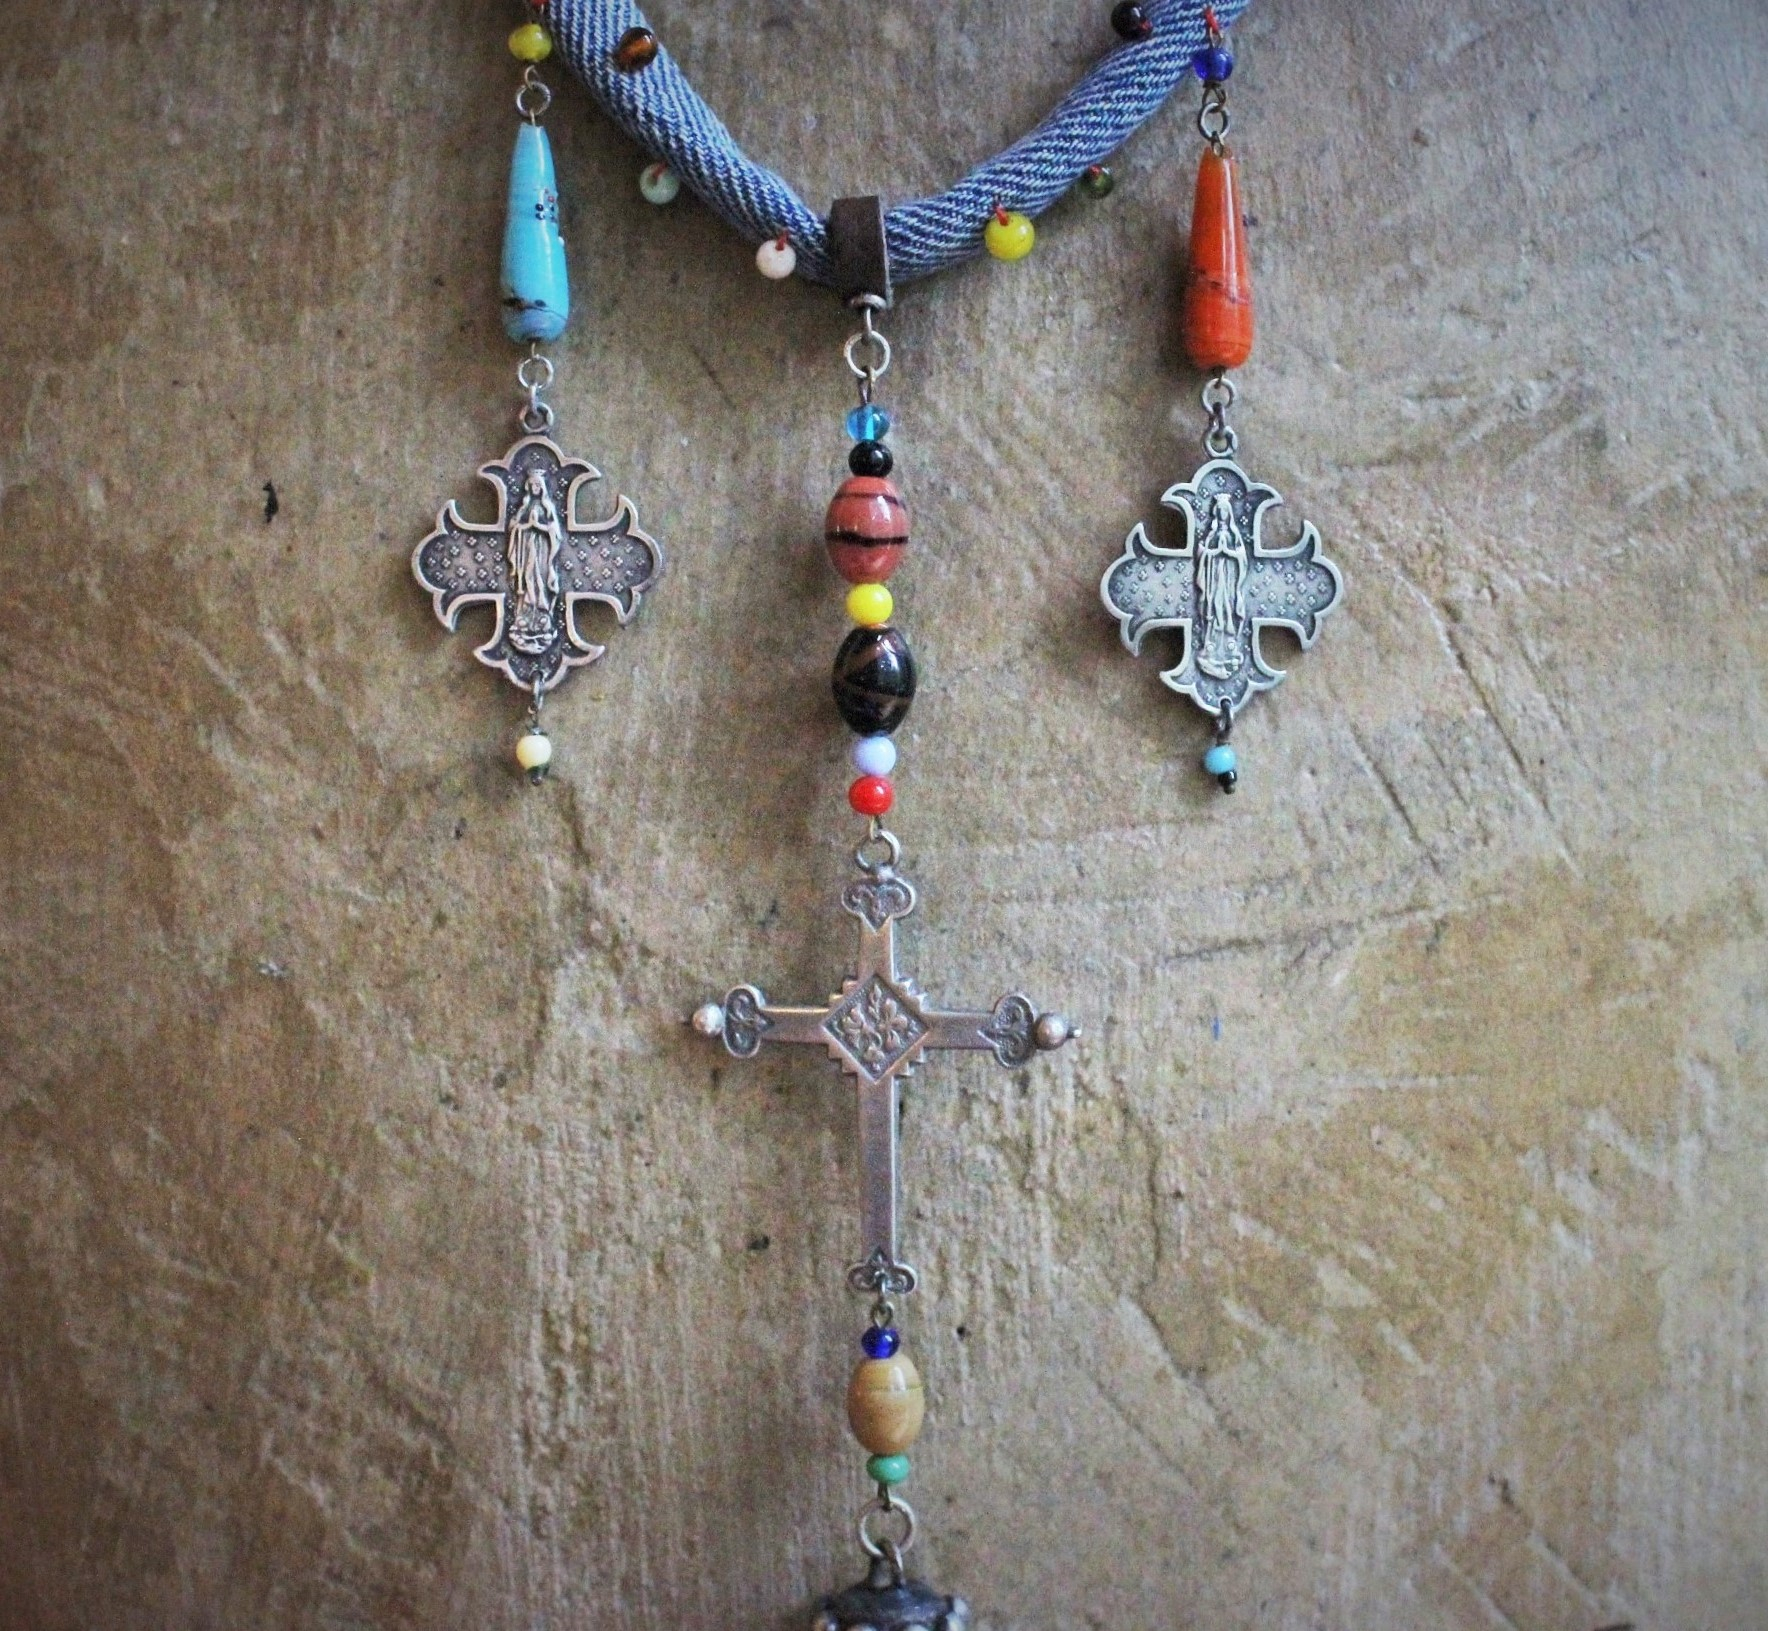 Hand Stitched Vintage Denim Necklace w/French Marian 4 Way Crosses, Antique Mardi Gras Beads, Artisan Leather Tassel, Sterling Clasp